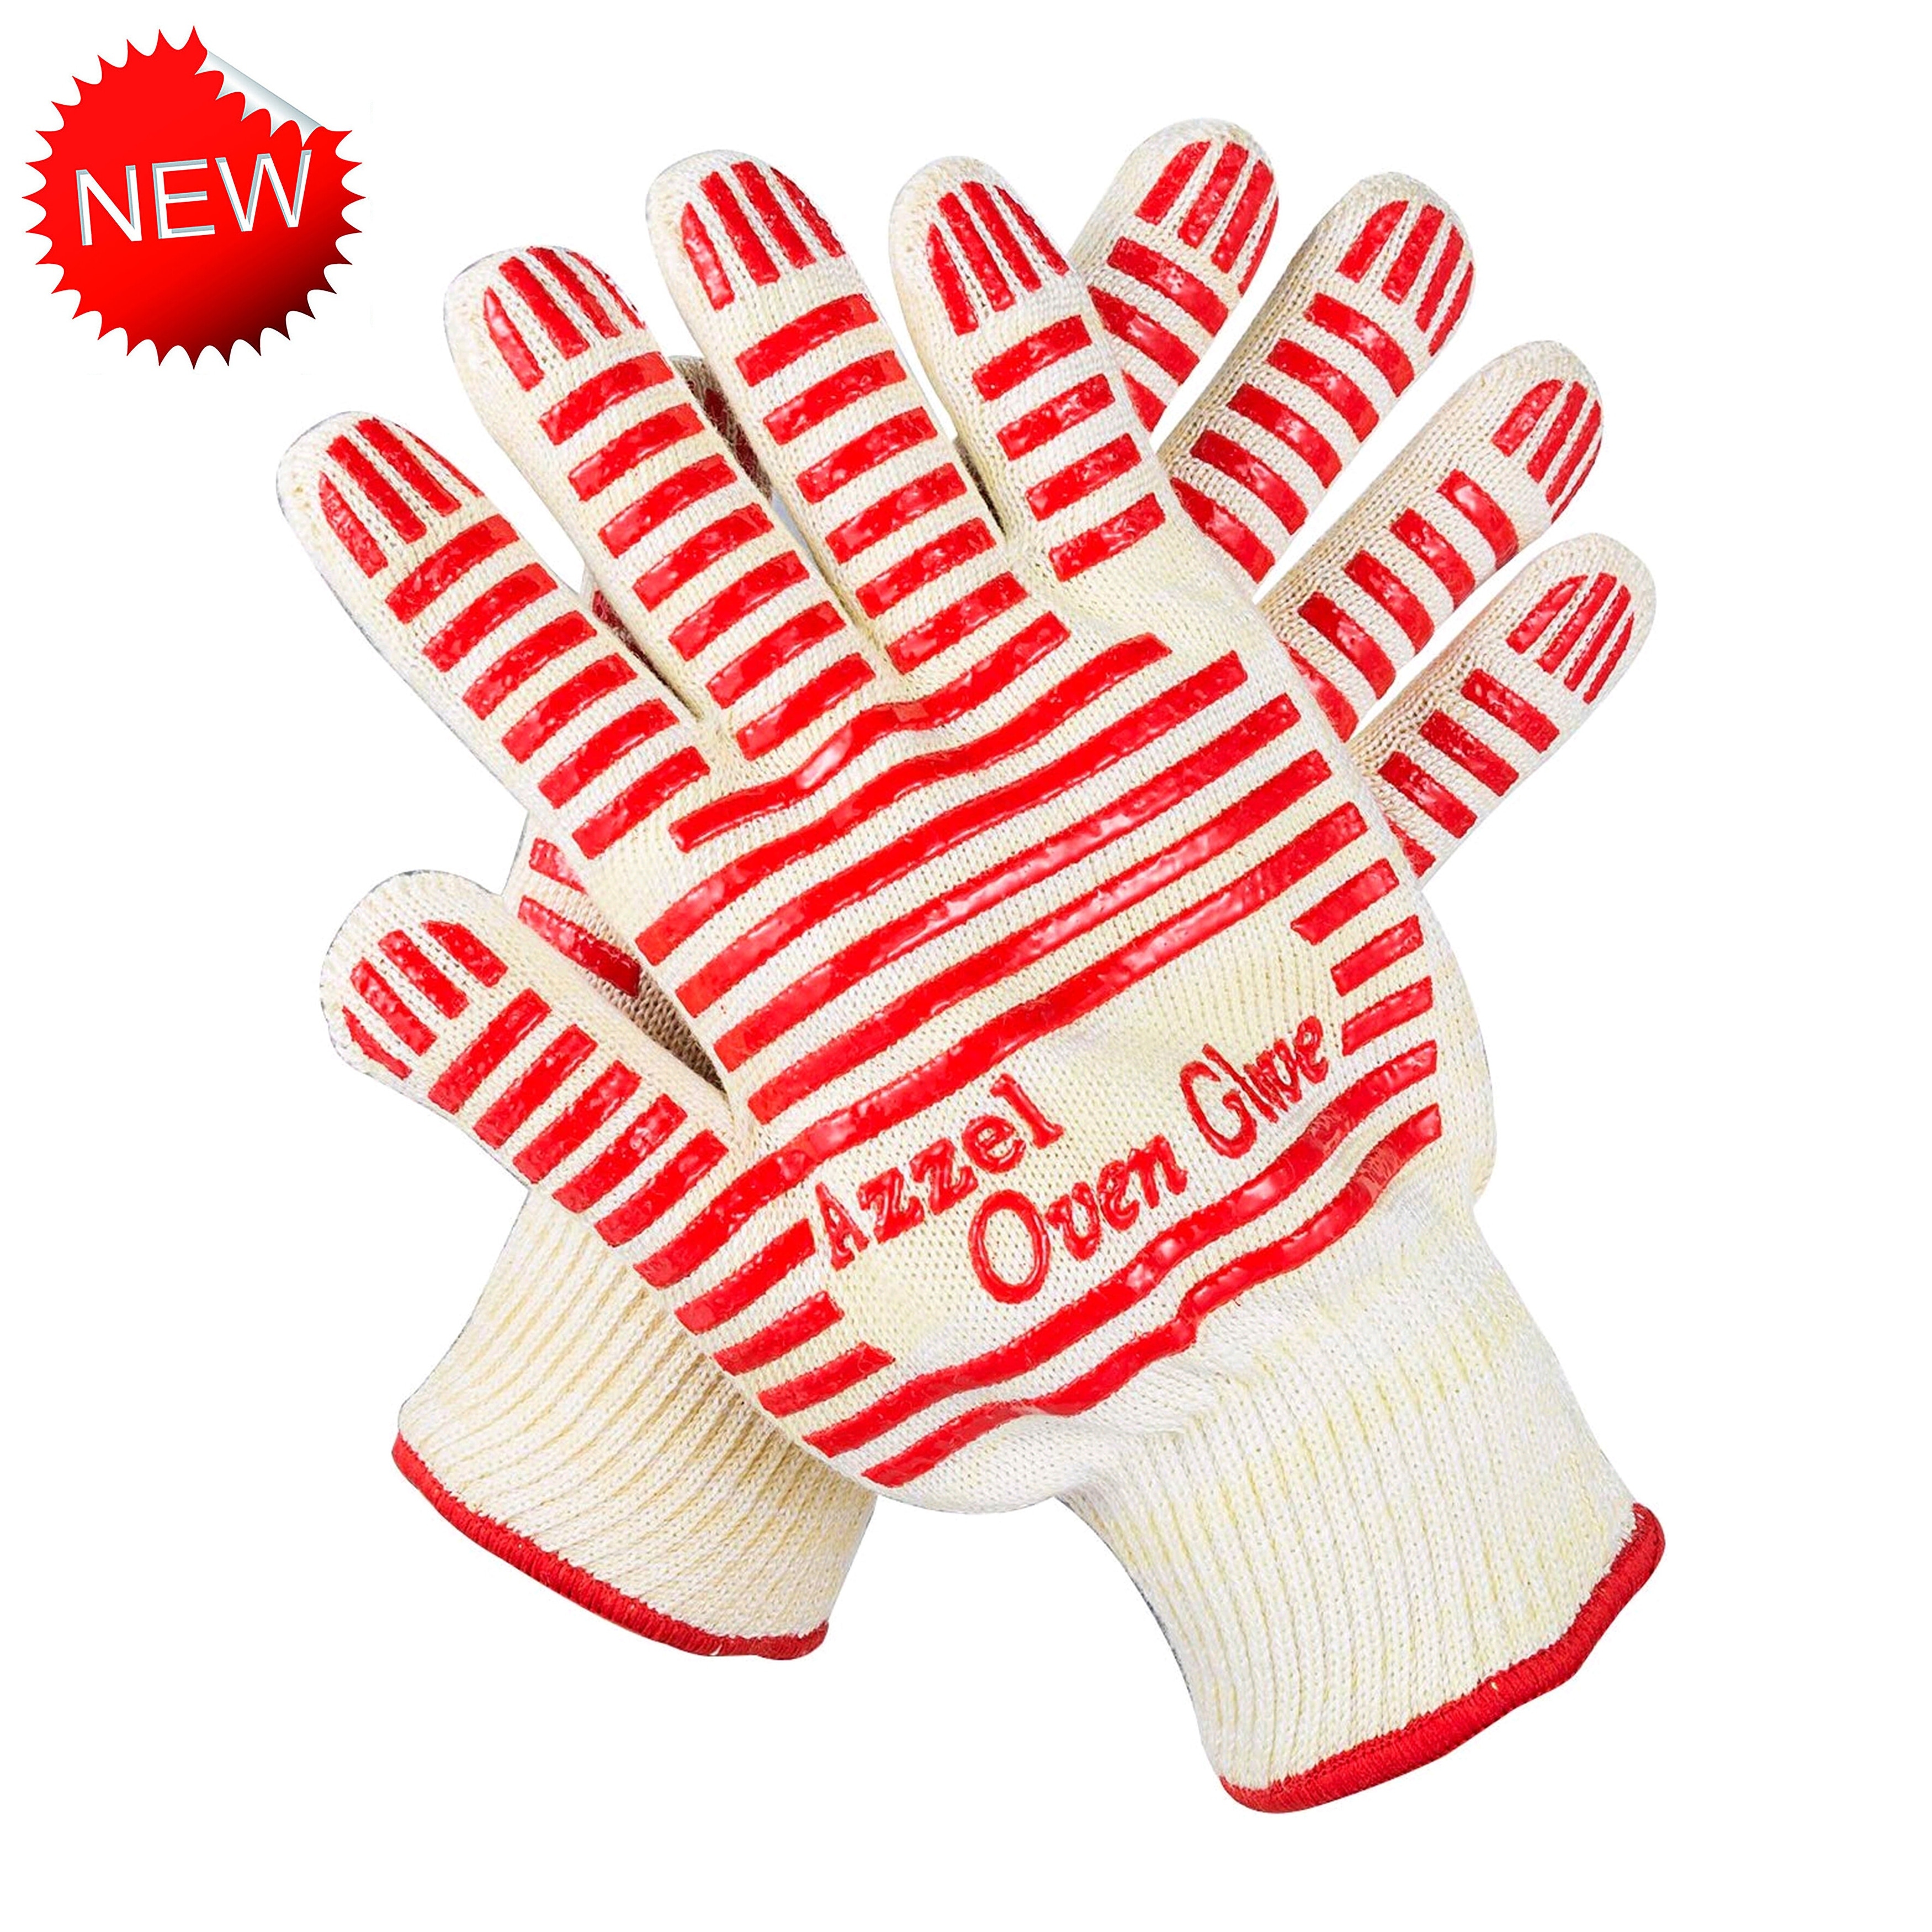 https://ak1.ostkcdn.com/images/products/is/images/direct/e08ec9393659a41f77acf4f5cbe1c023b0eef3d5/Oven-Glove-Oven-Mitts%2CEN407-Certified-Extreme-Heat-Up-to-932%C2%B0F%2CRed.jpg